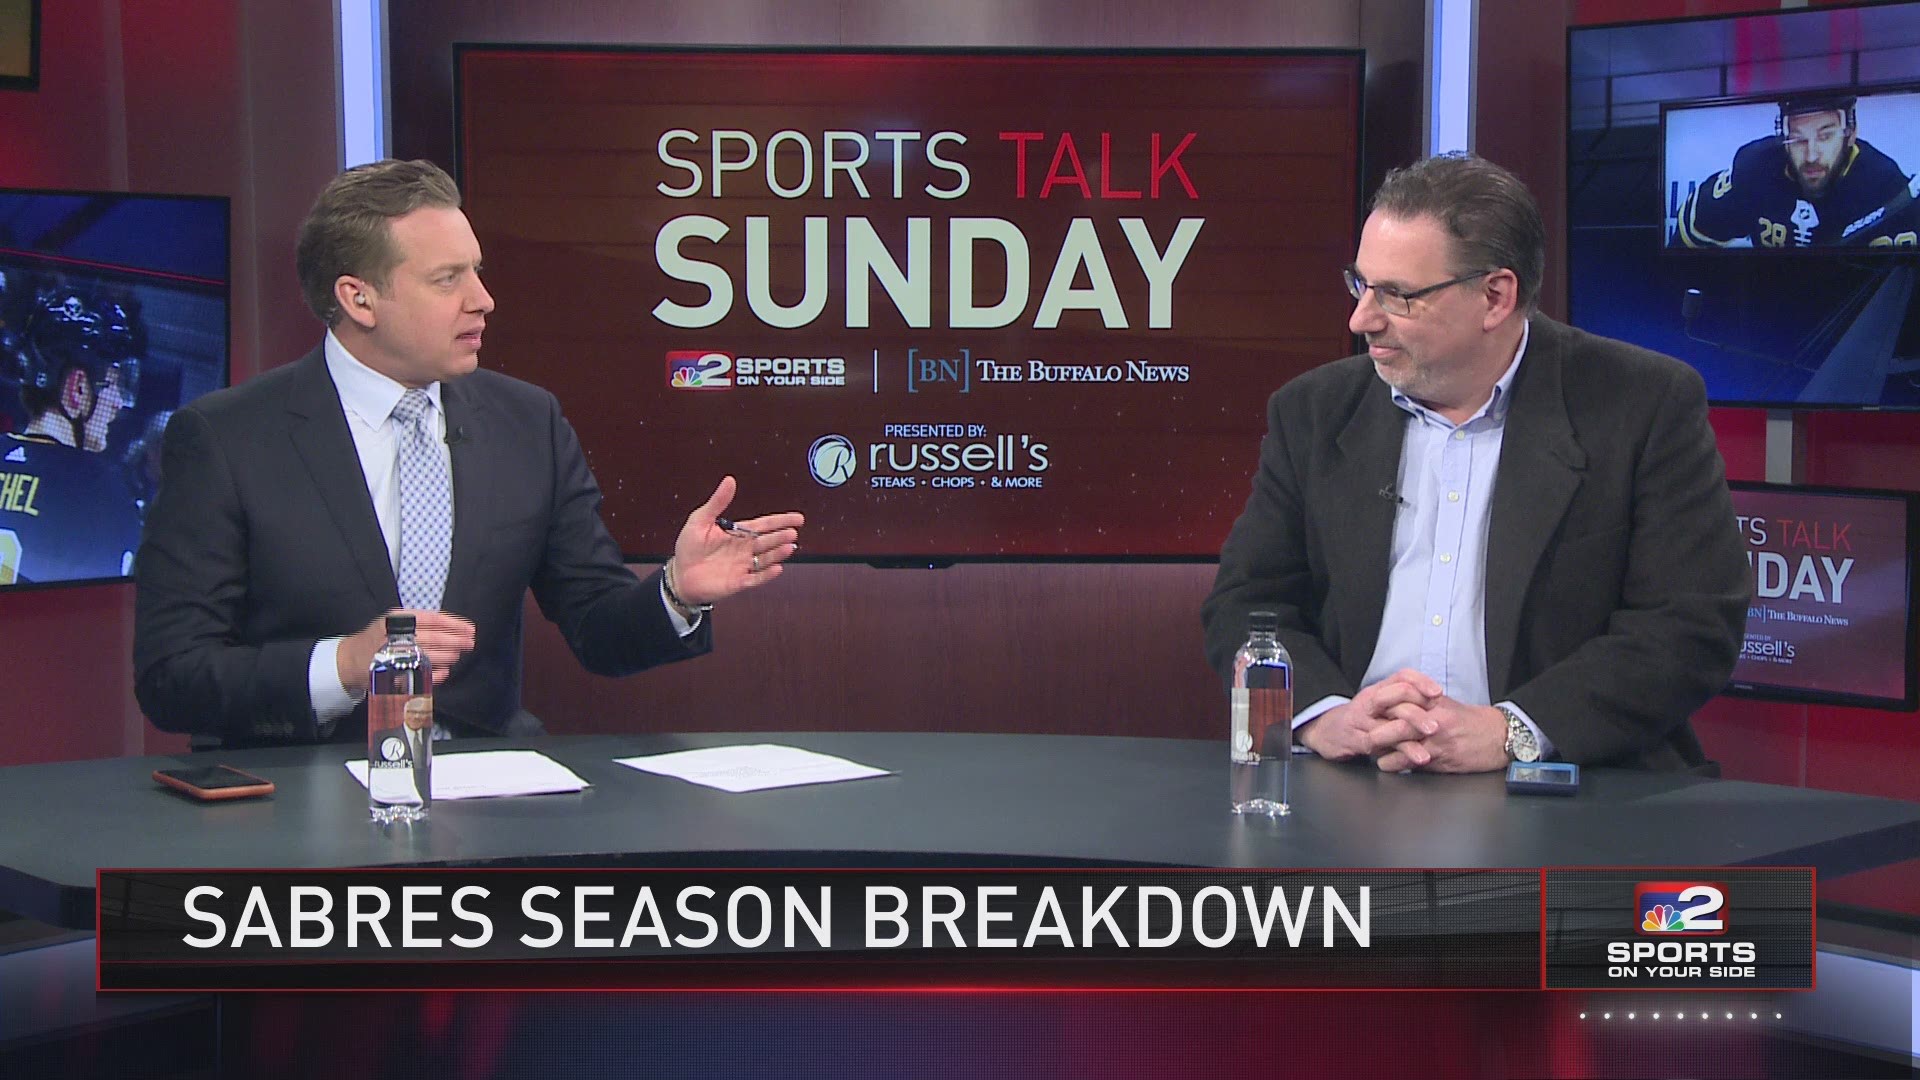 WGRZ-TV Sports Director Adam Benigni and Mike Harrington from the Buffalo News discuss the Sabres season so far and what lies ahead for the team.